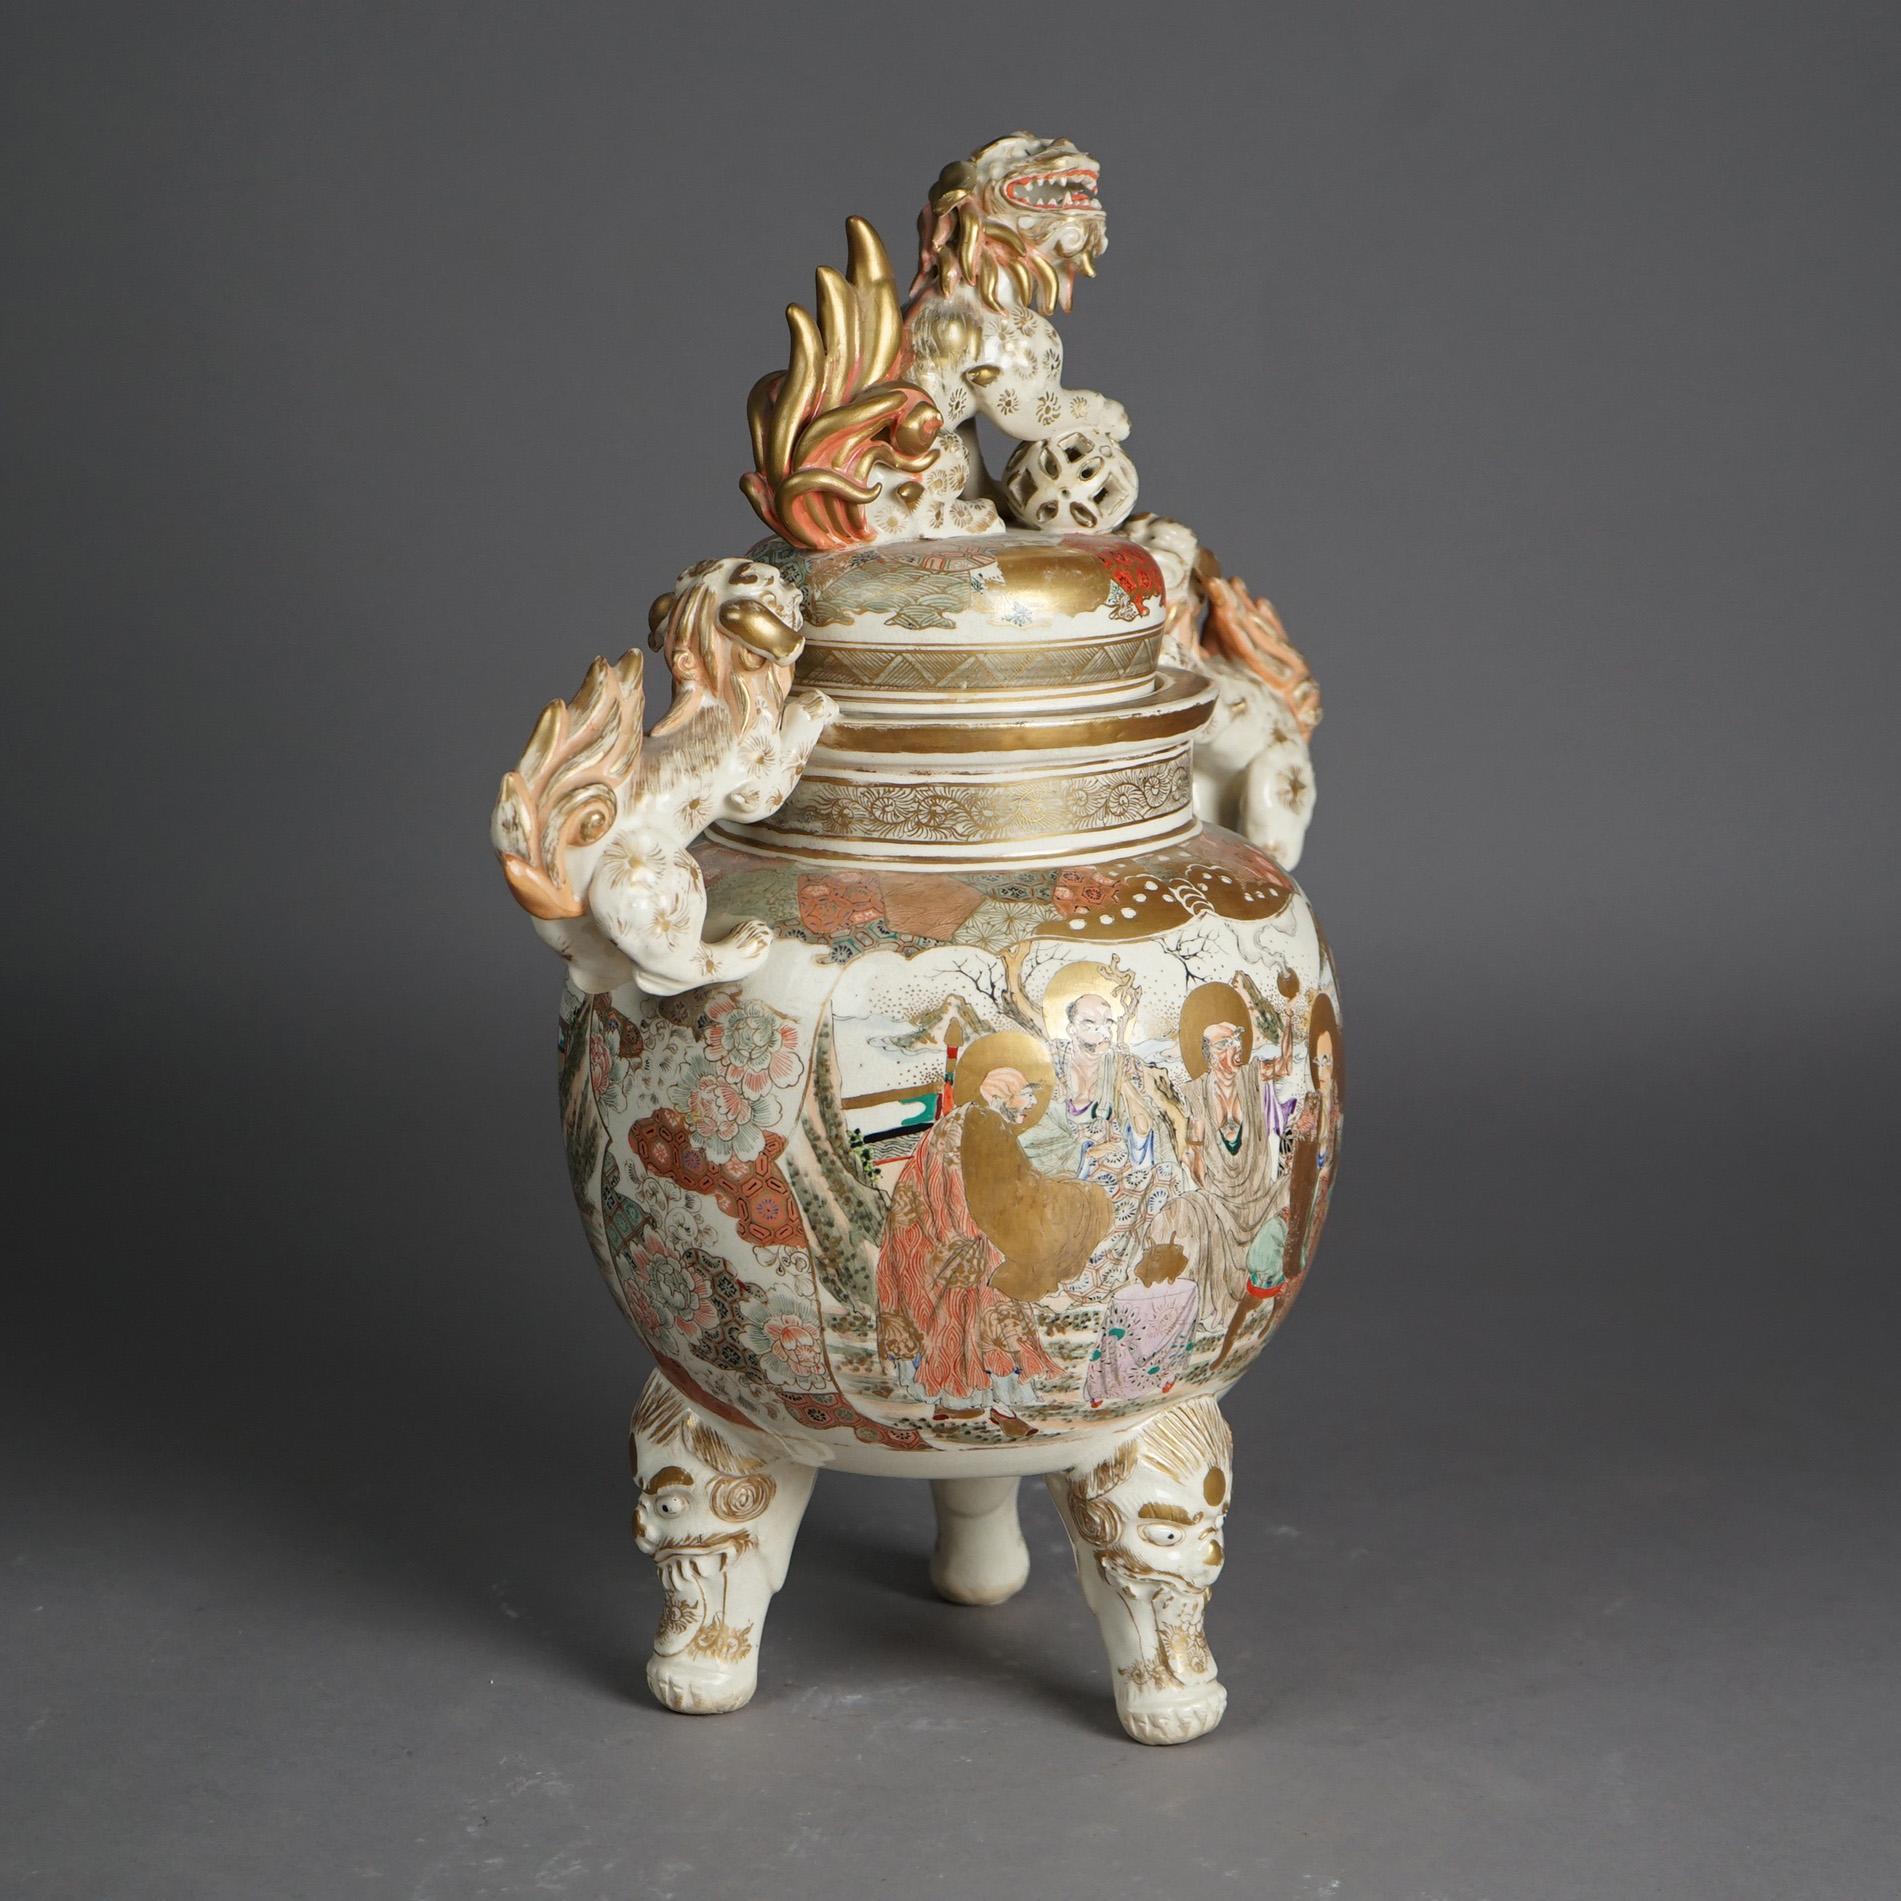 An antique Japanese censer offers porcelain construction in lidded urn form and having foo dog finial and handles; vessel with hand painted figures; raised on three legs; gilt highlights throughout, c1920

Measures - 17.5